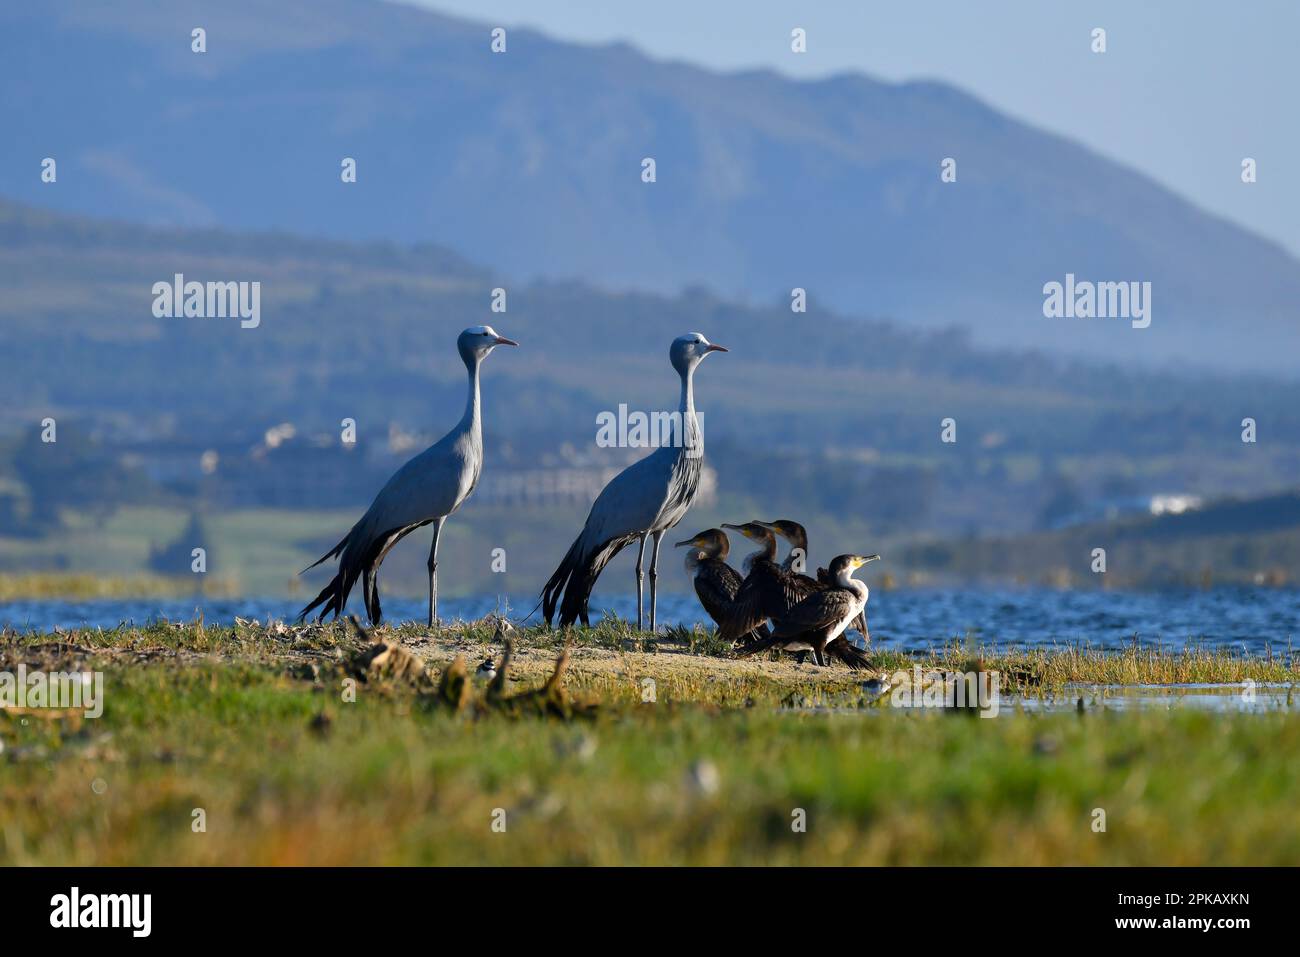 A pair of adult Blue Cranes (Anthropoides paradiseus) with White-breasted Cormorants (Phalacrocorax lucidus), Bot River wetlands, South Africa. Stock Photo